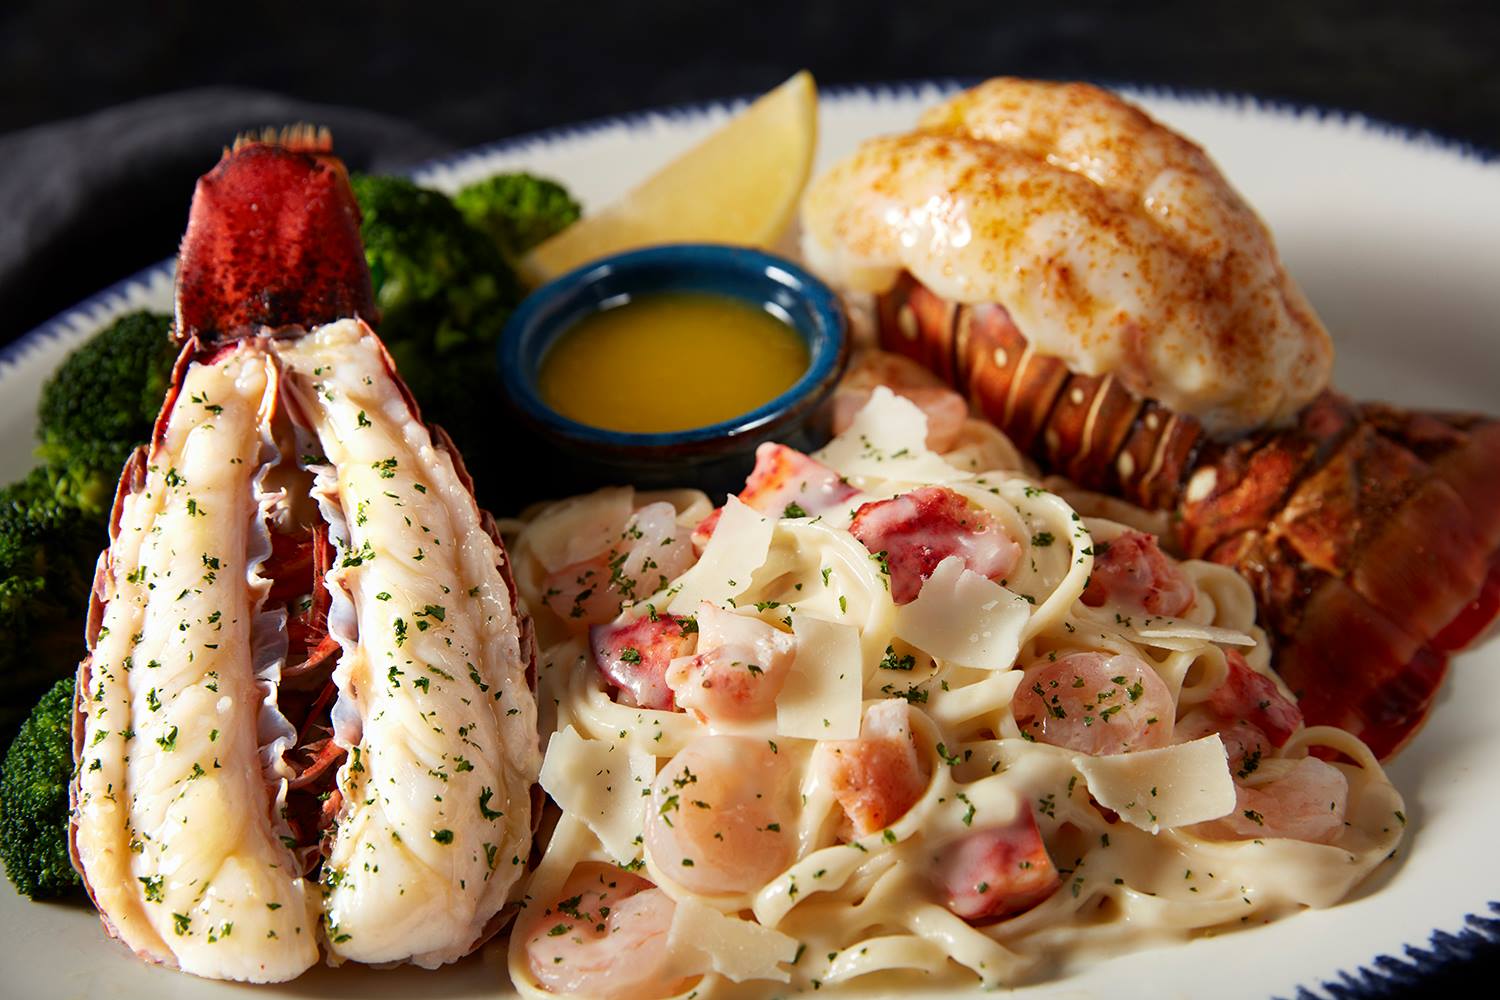 Red Lobster: Save $5 on two adult entrées